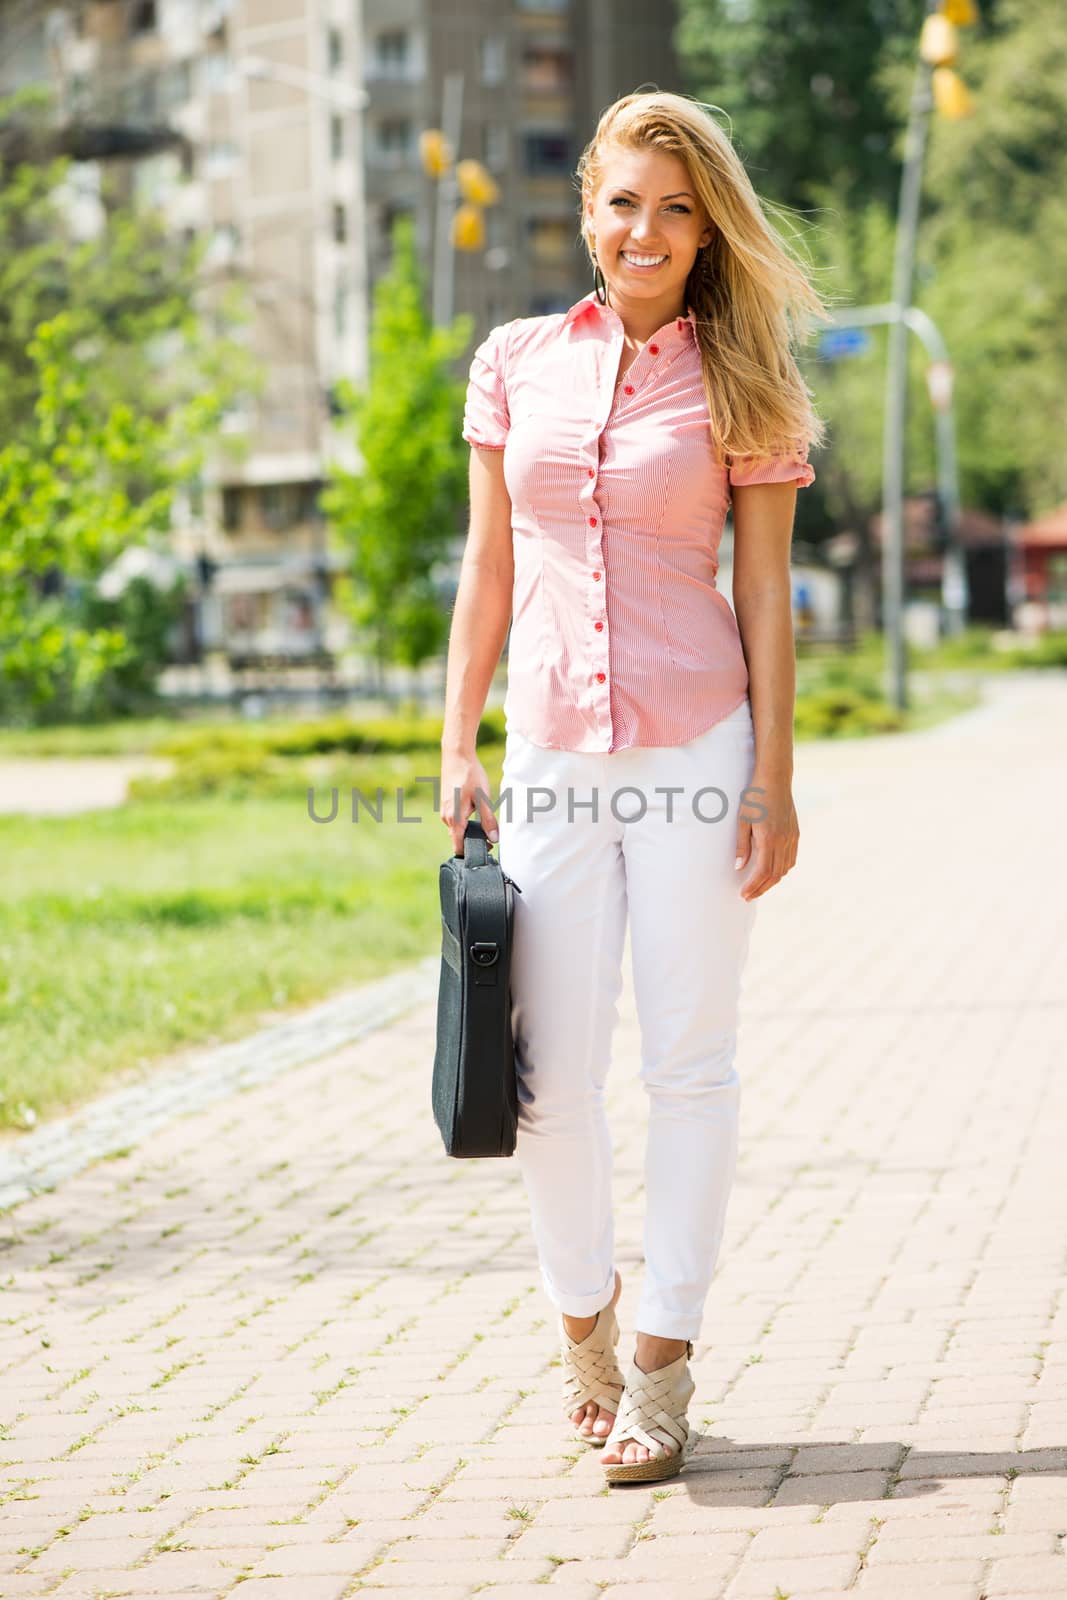 Smiling Business woman in the park by MilanMarkovic78